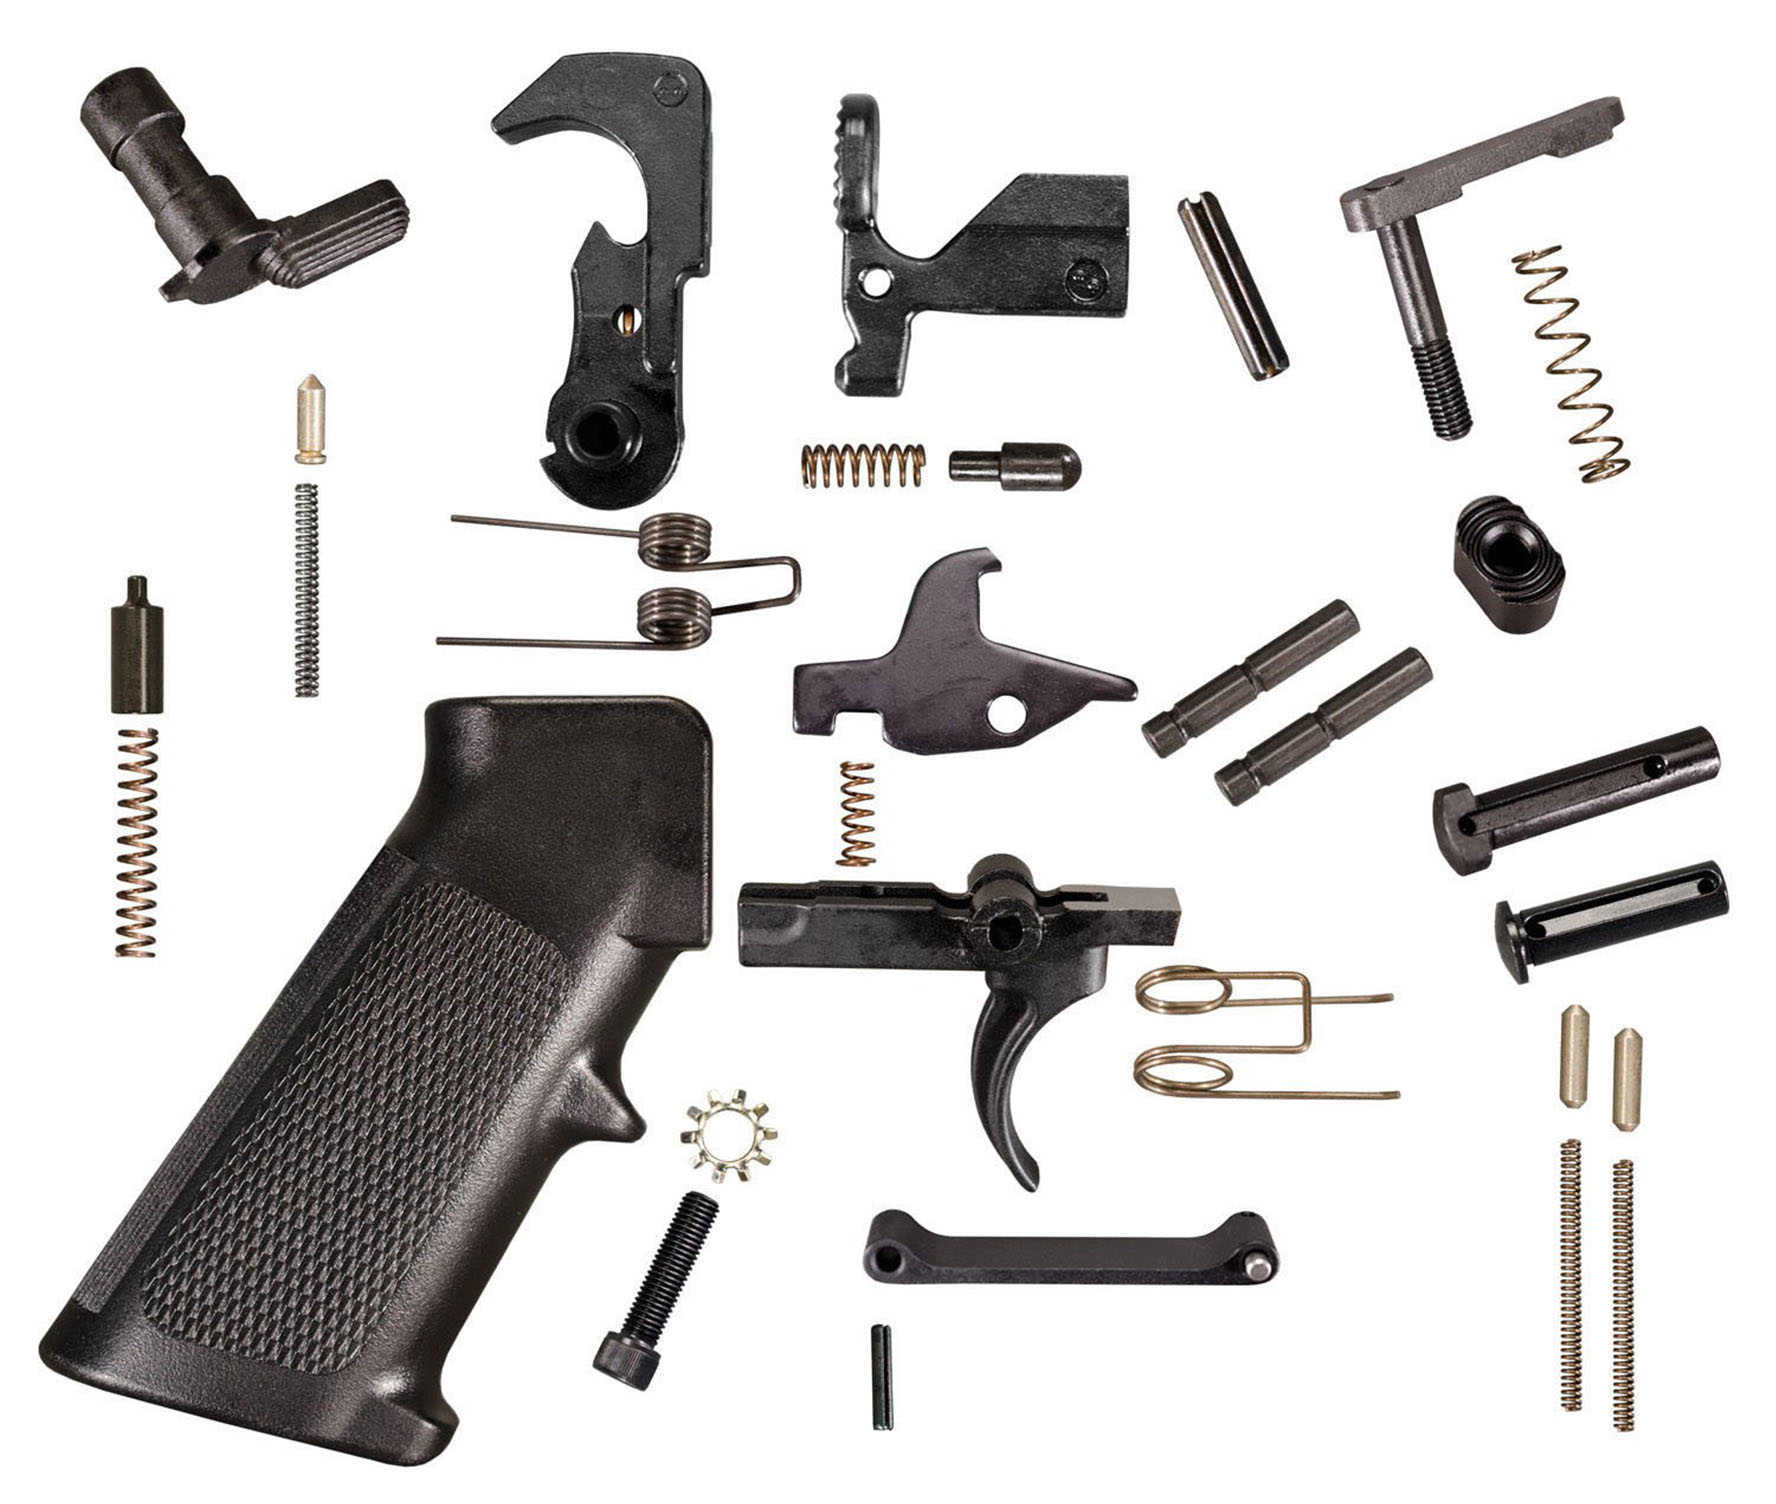 Windham Weaponry PKLPK Lower Receiver Parts Kit AR-15 Steel/Aluminum Clamshell Package